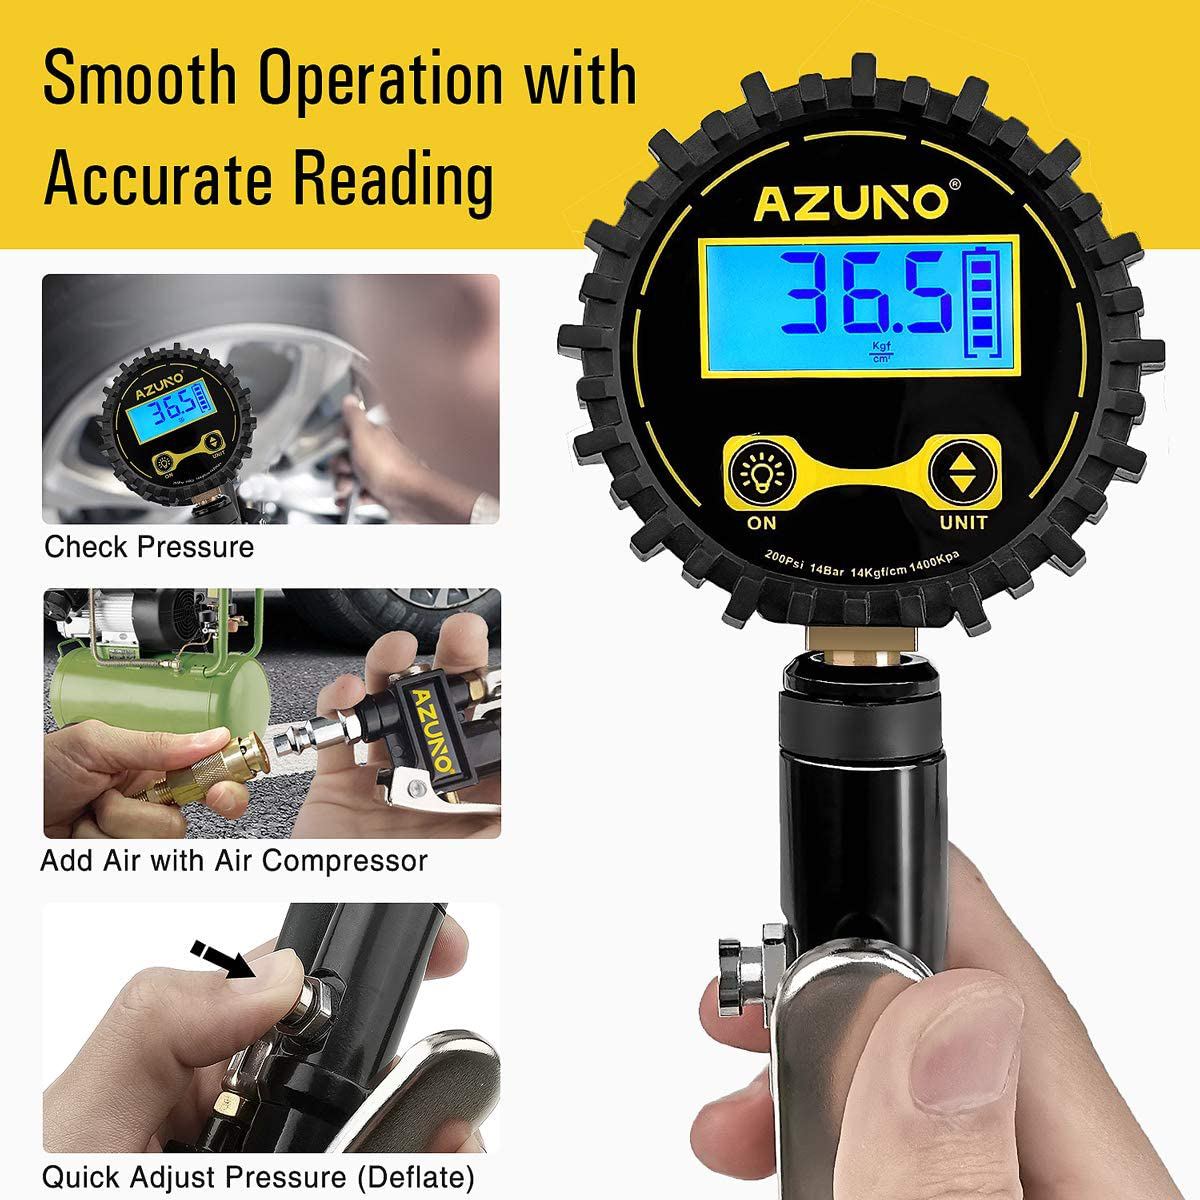 AZUNO Digital Tire Inflator with Pressure Gauge, 200 PSI, Heavy Duty Air Compressor Accessories, w/Rubber Hose Lock on Air Chuck and Quick Connect Coupler